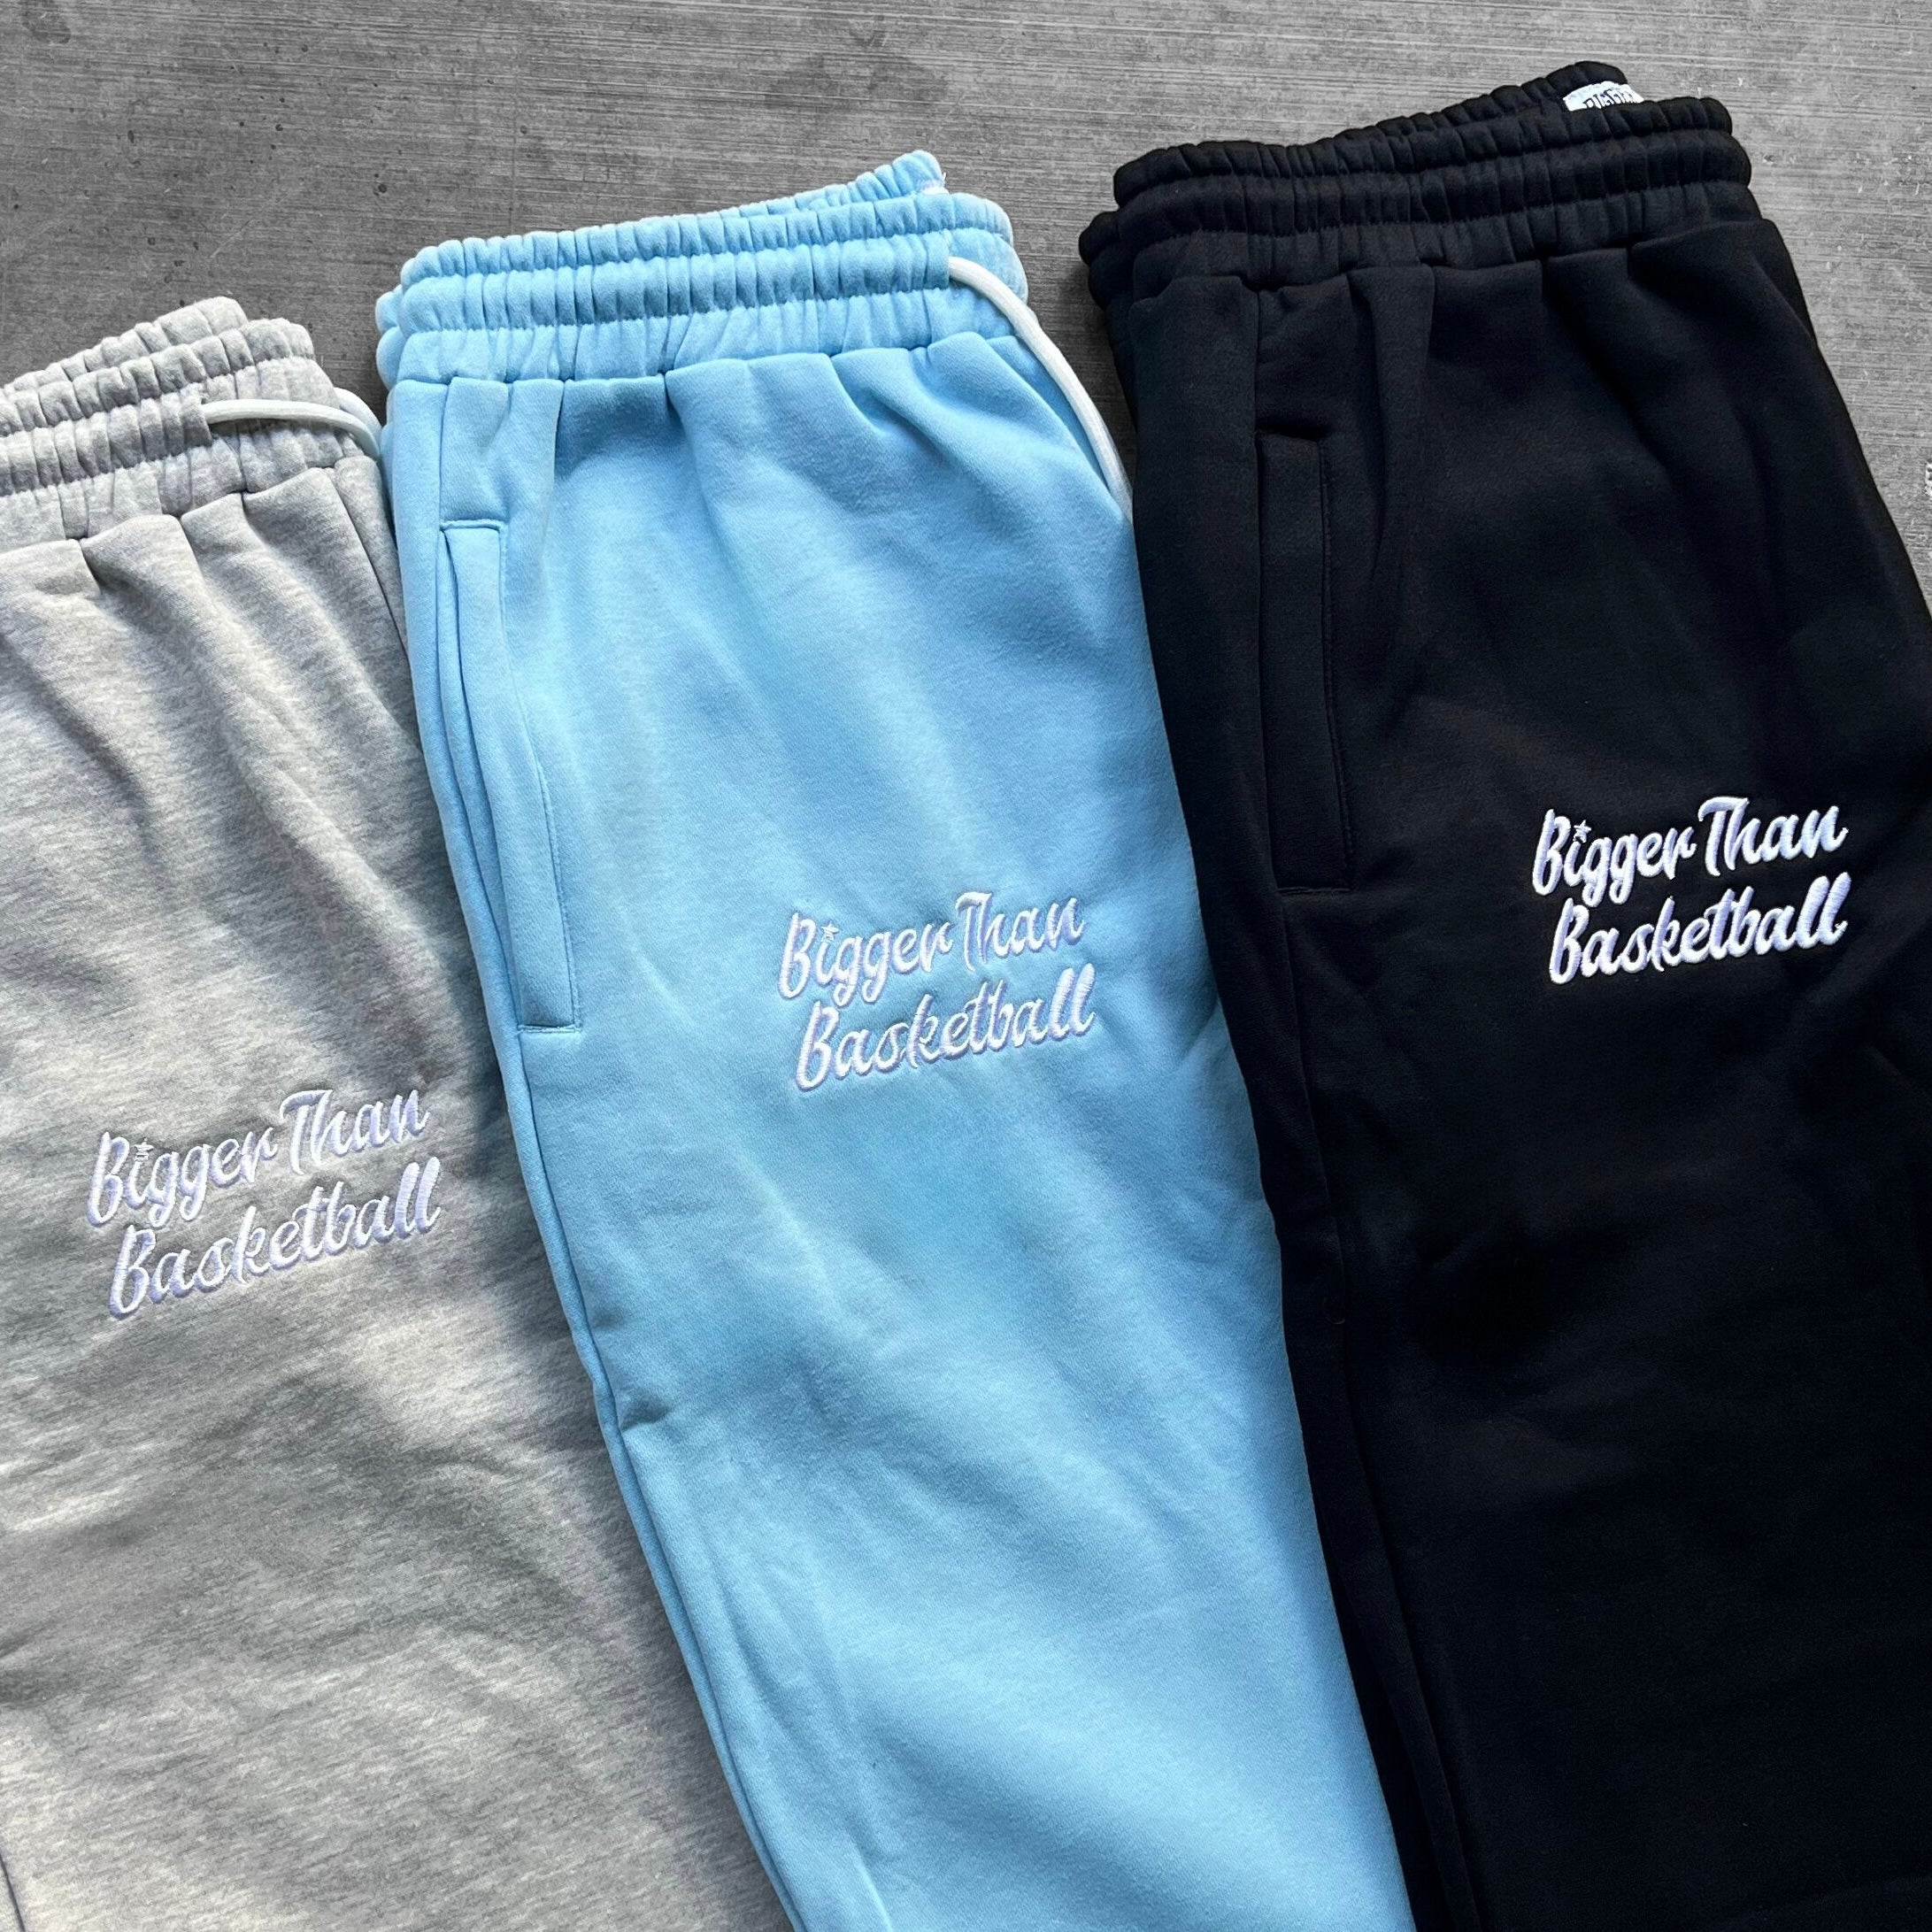 "BTB Signature" Embroidered Joggers - Grey - Youth